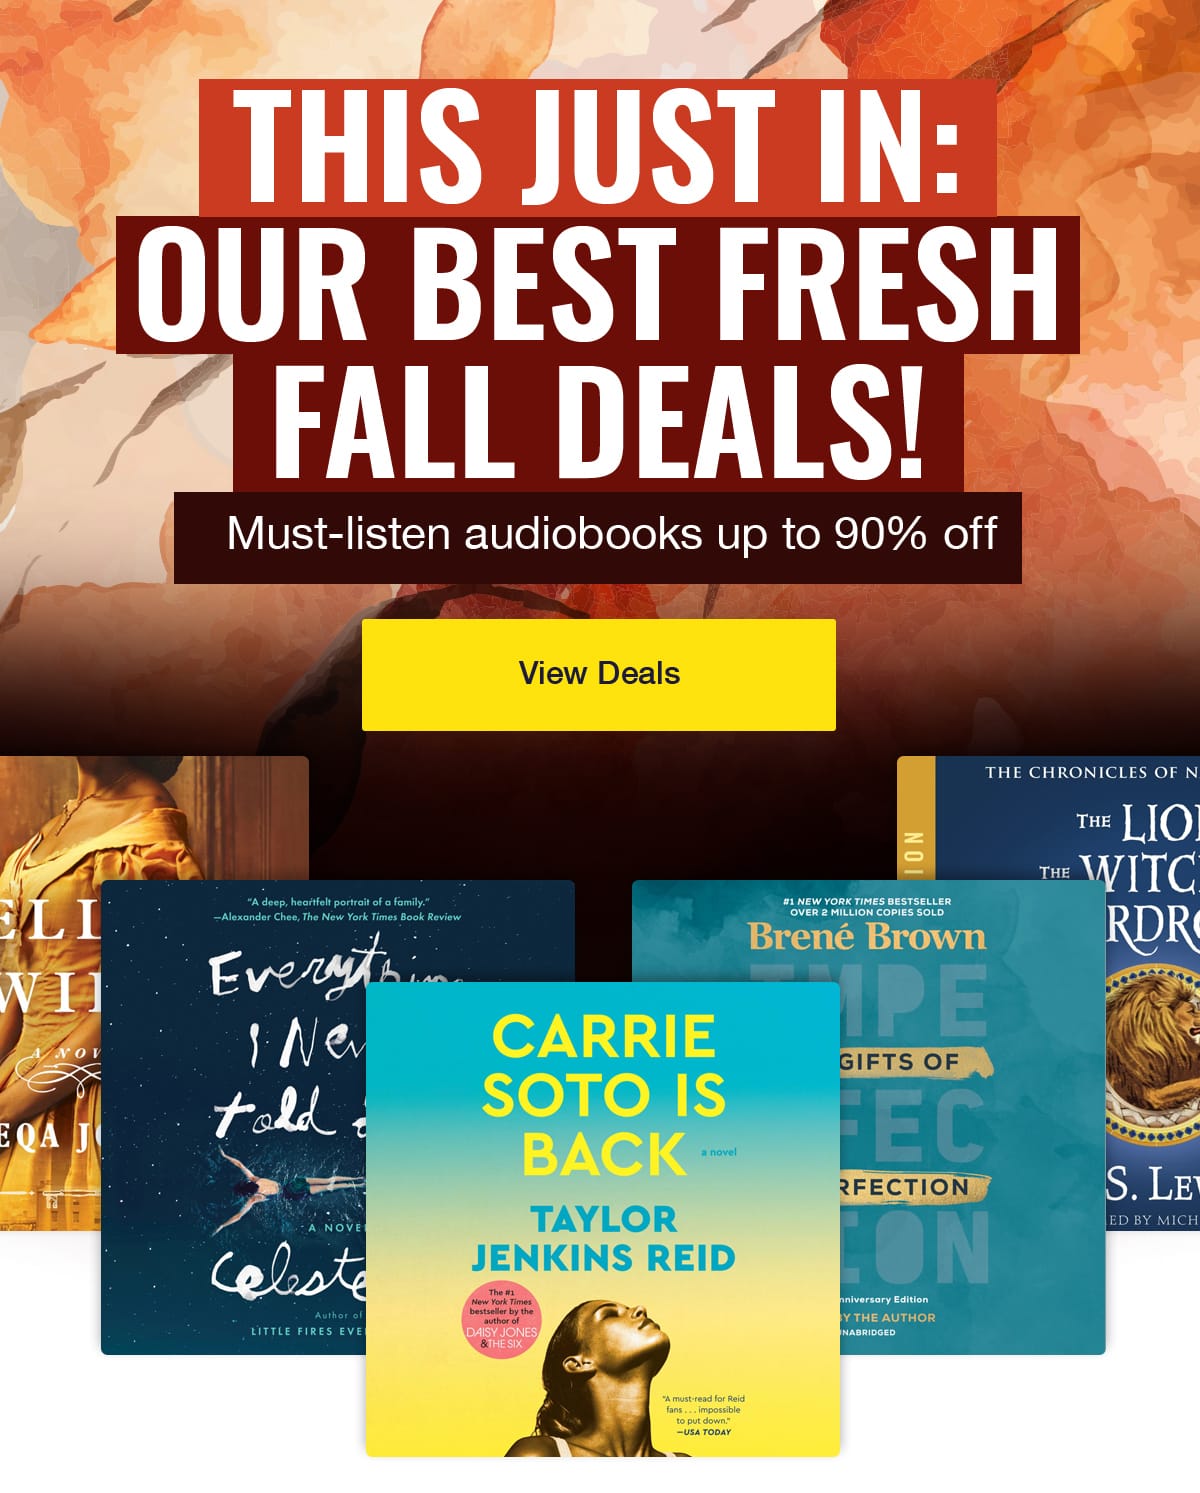 This Just In: Our Best Fresh Fall Deals!